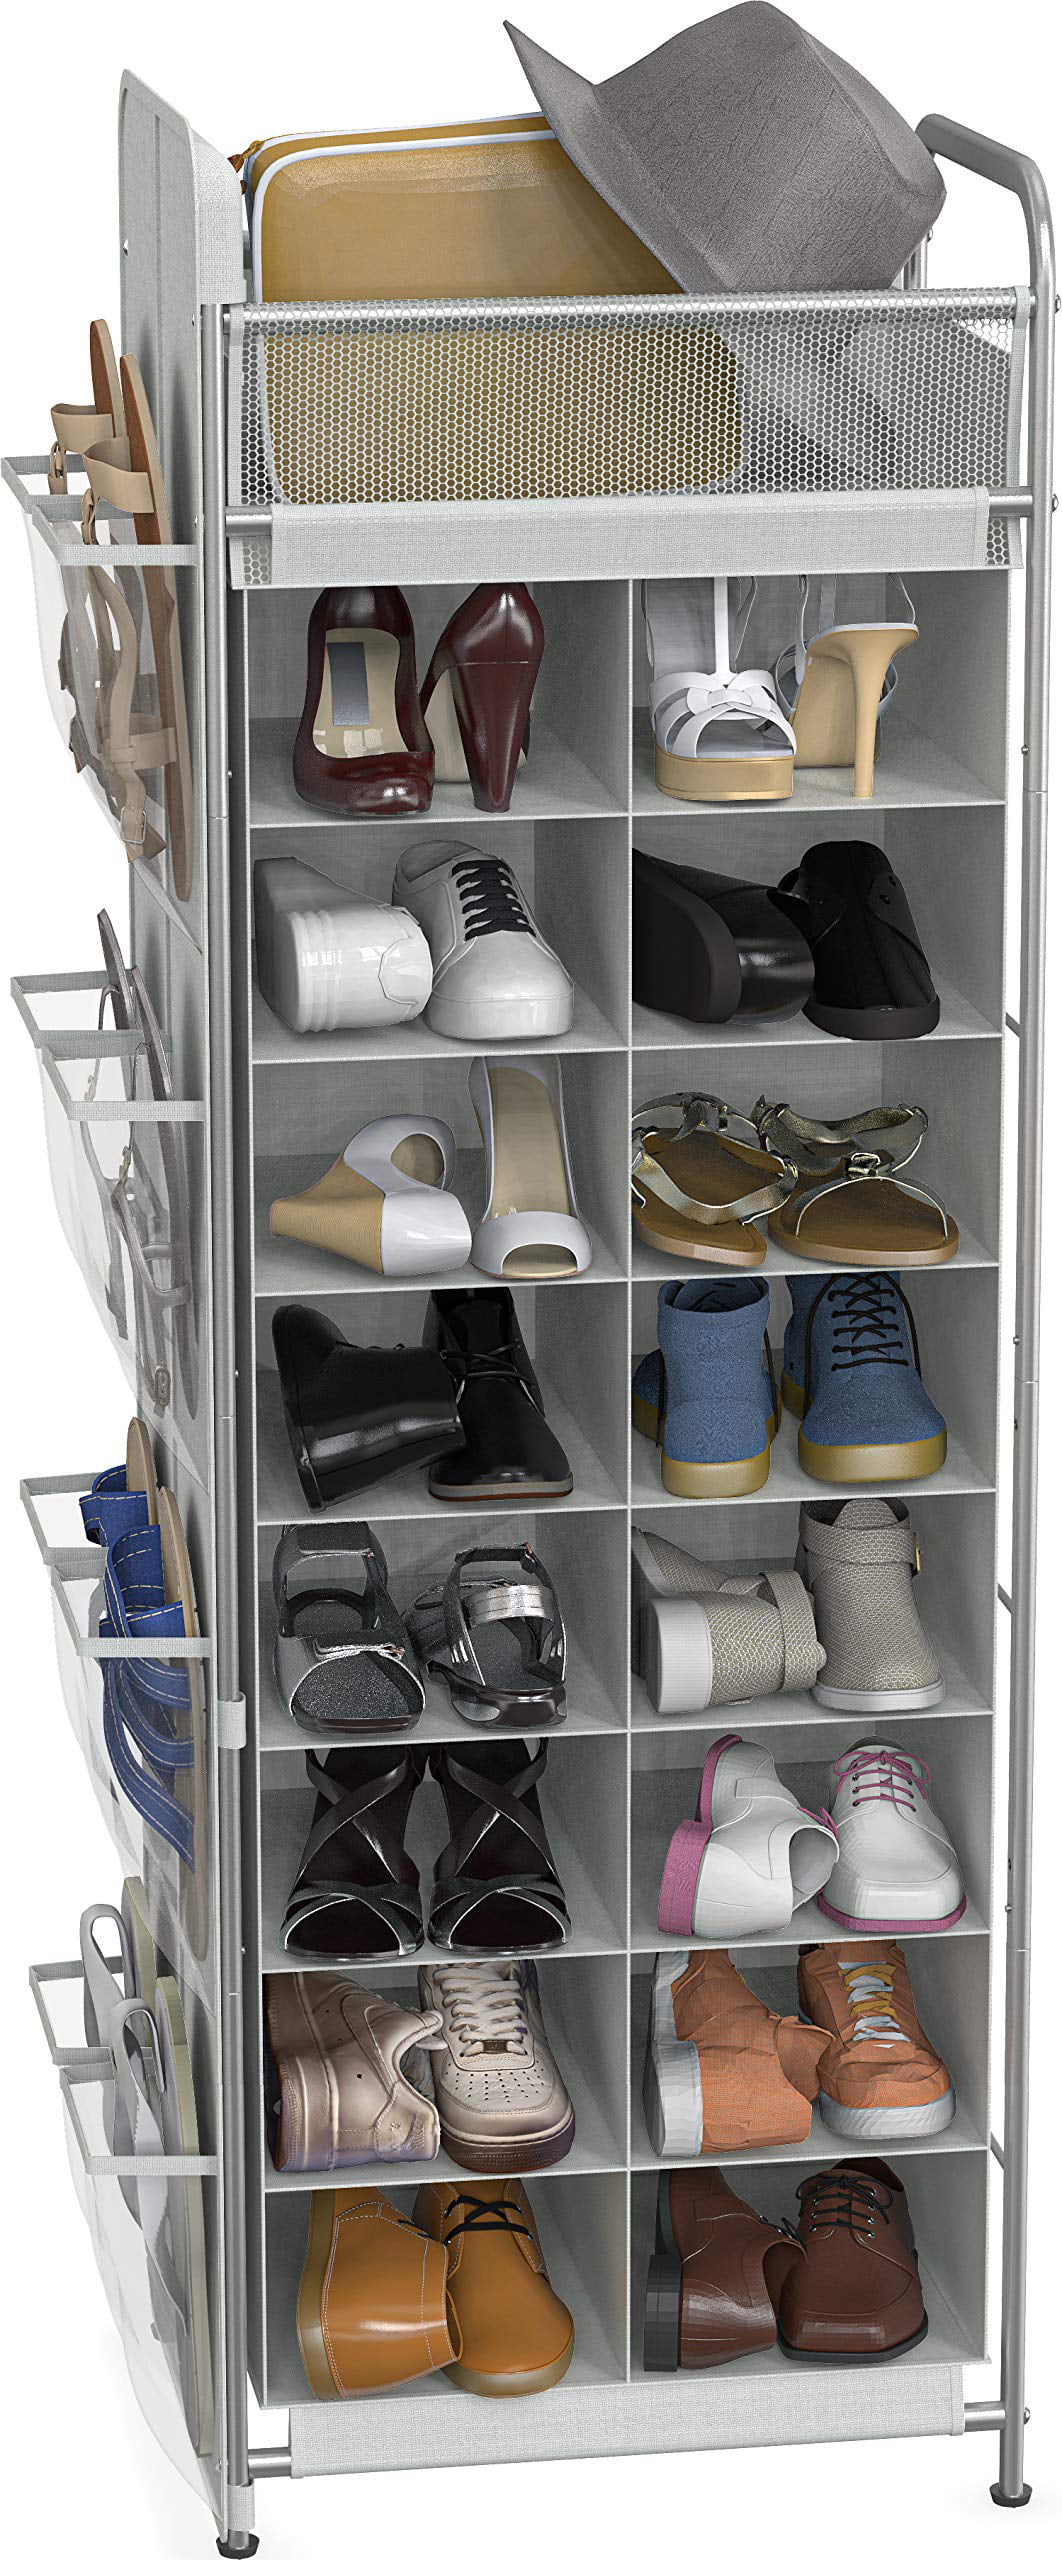 Yescom 4-Pair Boot Rack Organizer Storage Stand Holder Hanger Home Closet Shoes Shelf Easy to Assemble